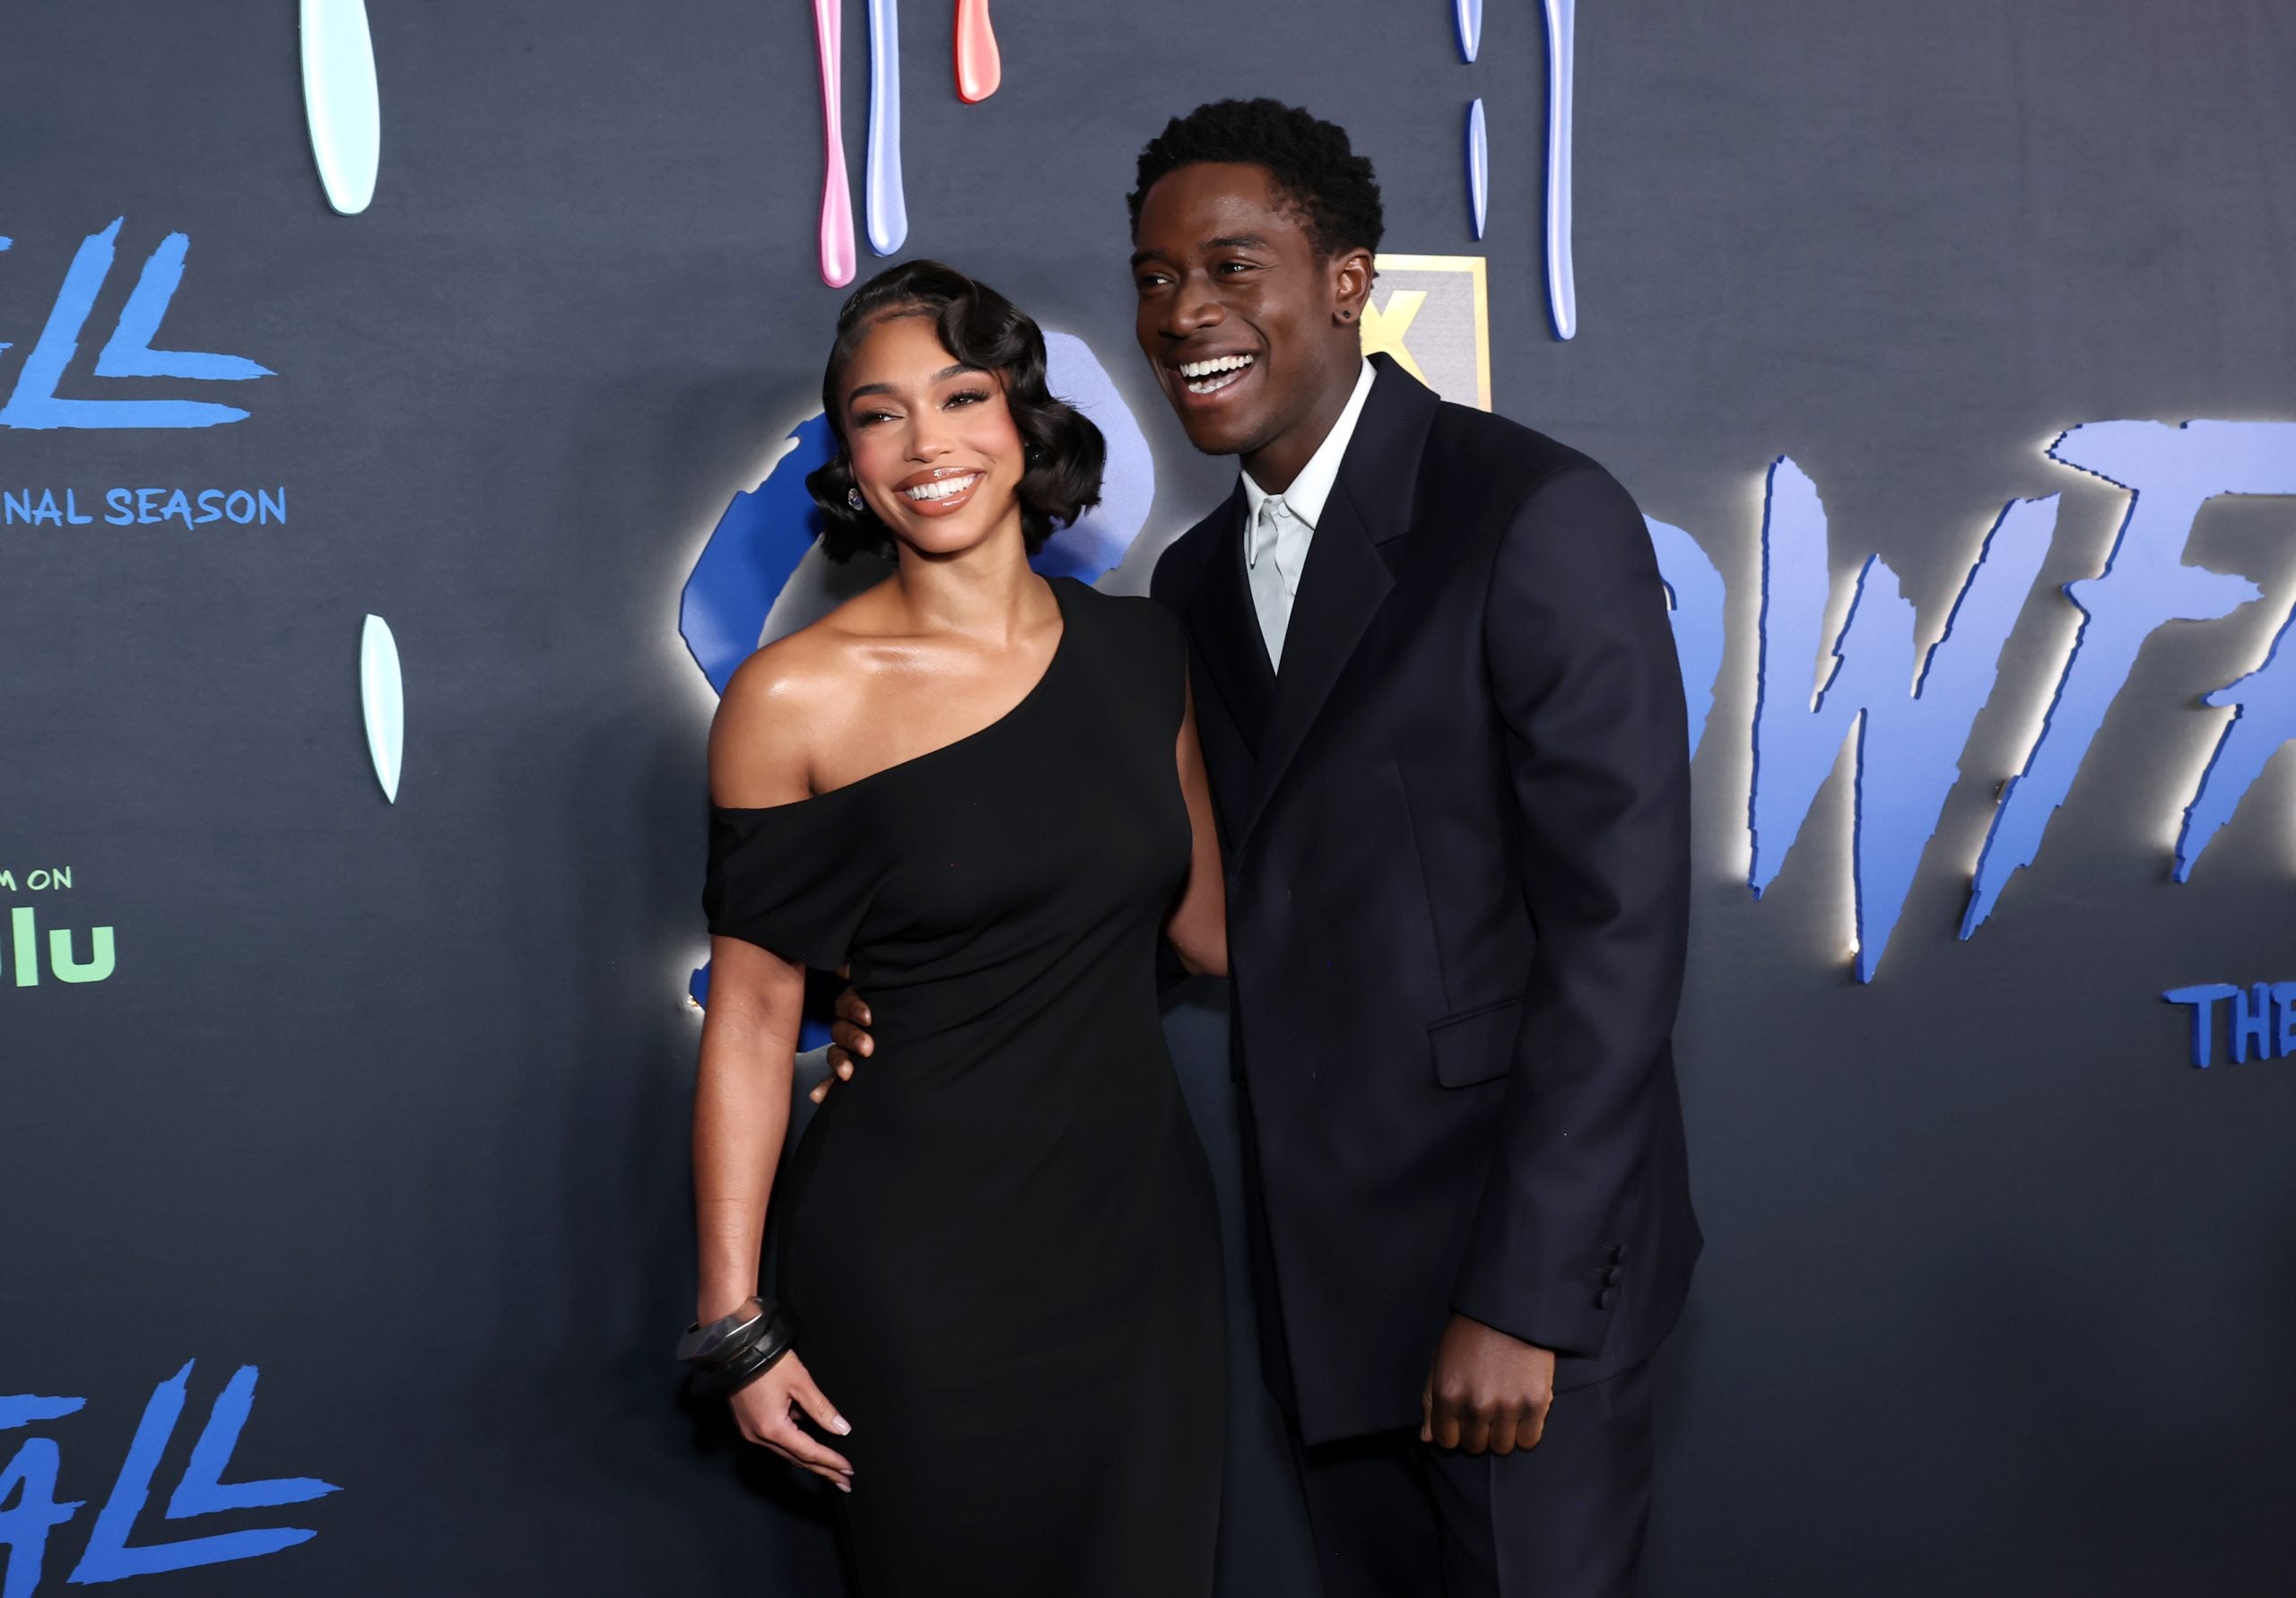 Damson Idris And Lori Harvey Call It Quits After Less Than A Year Of Dating